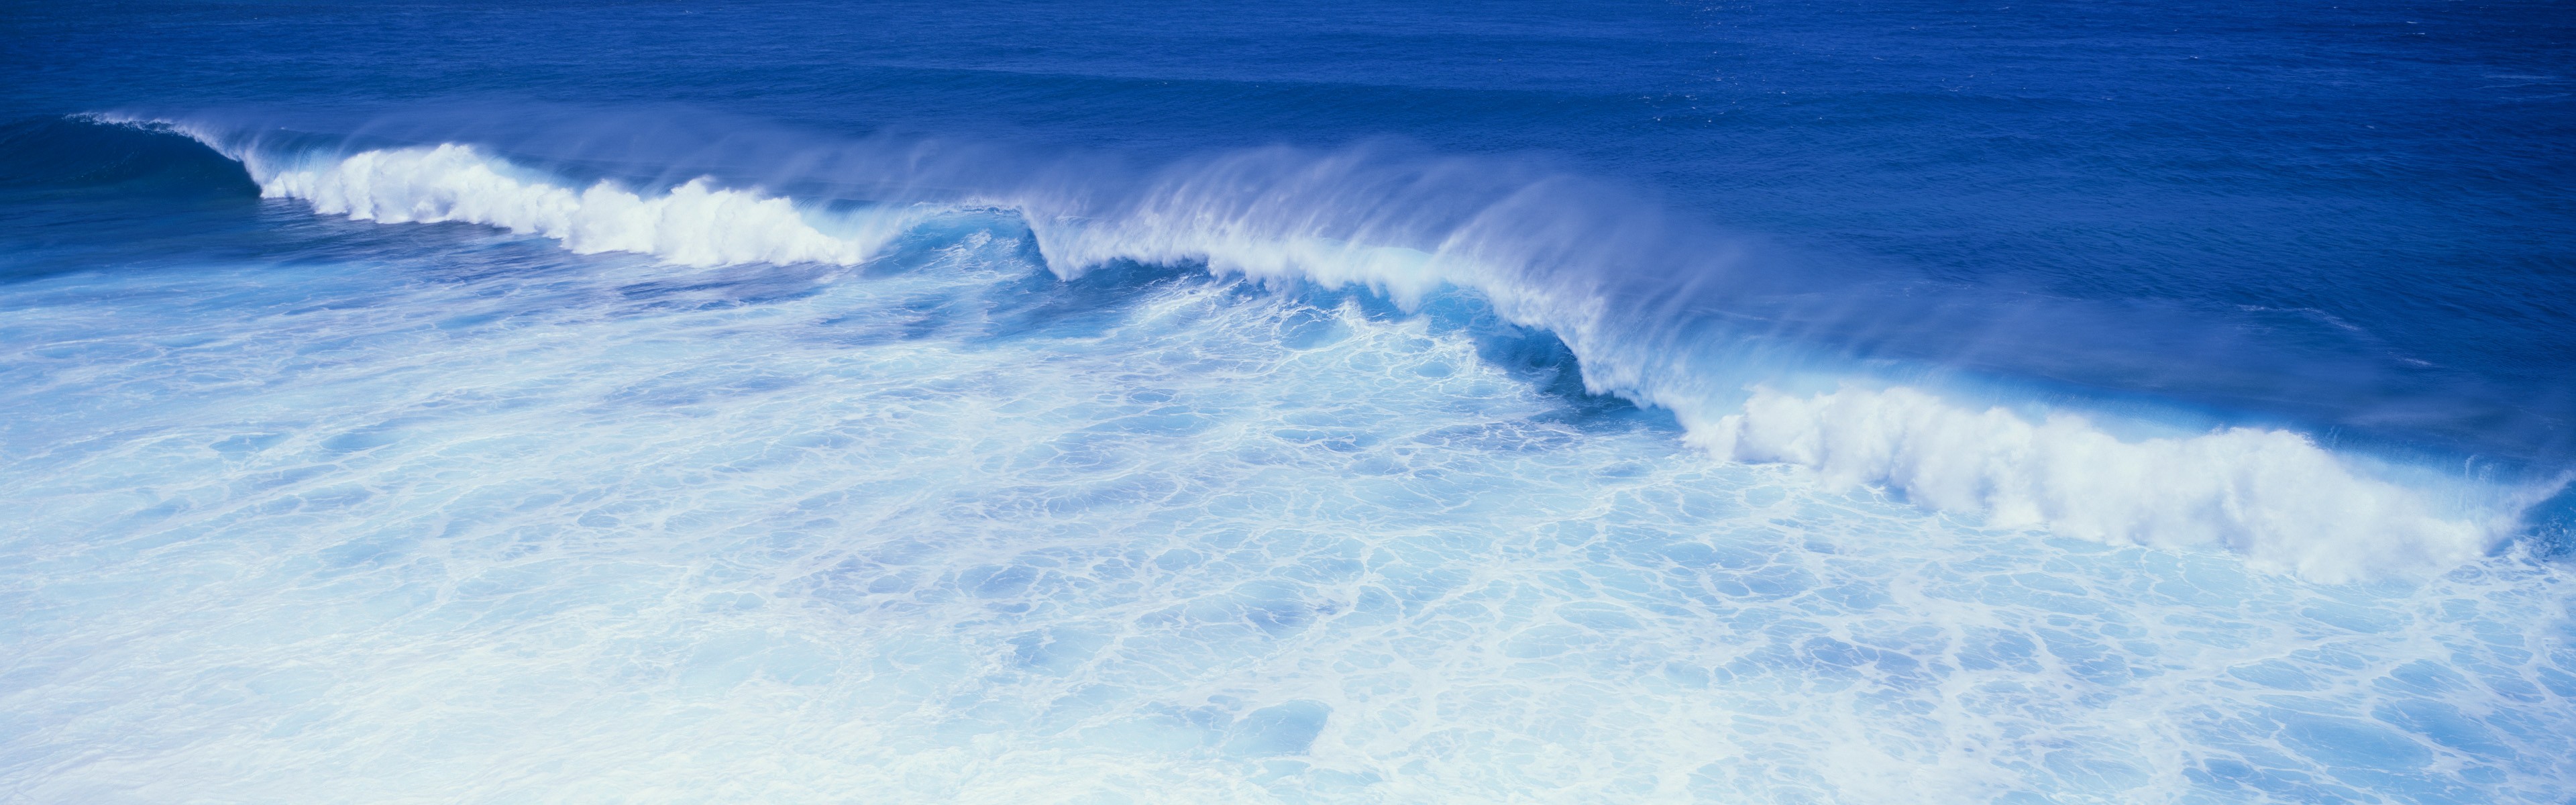 General 3840x1200 nature beach sea waves outdoors water